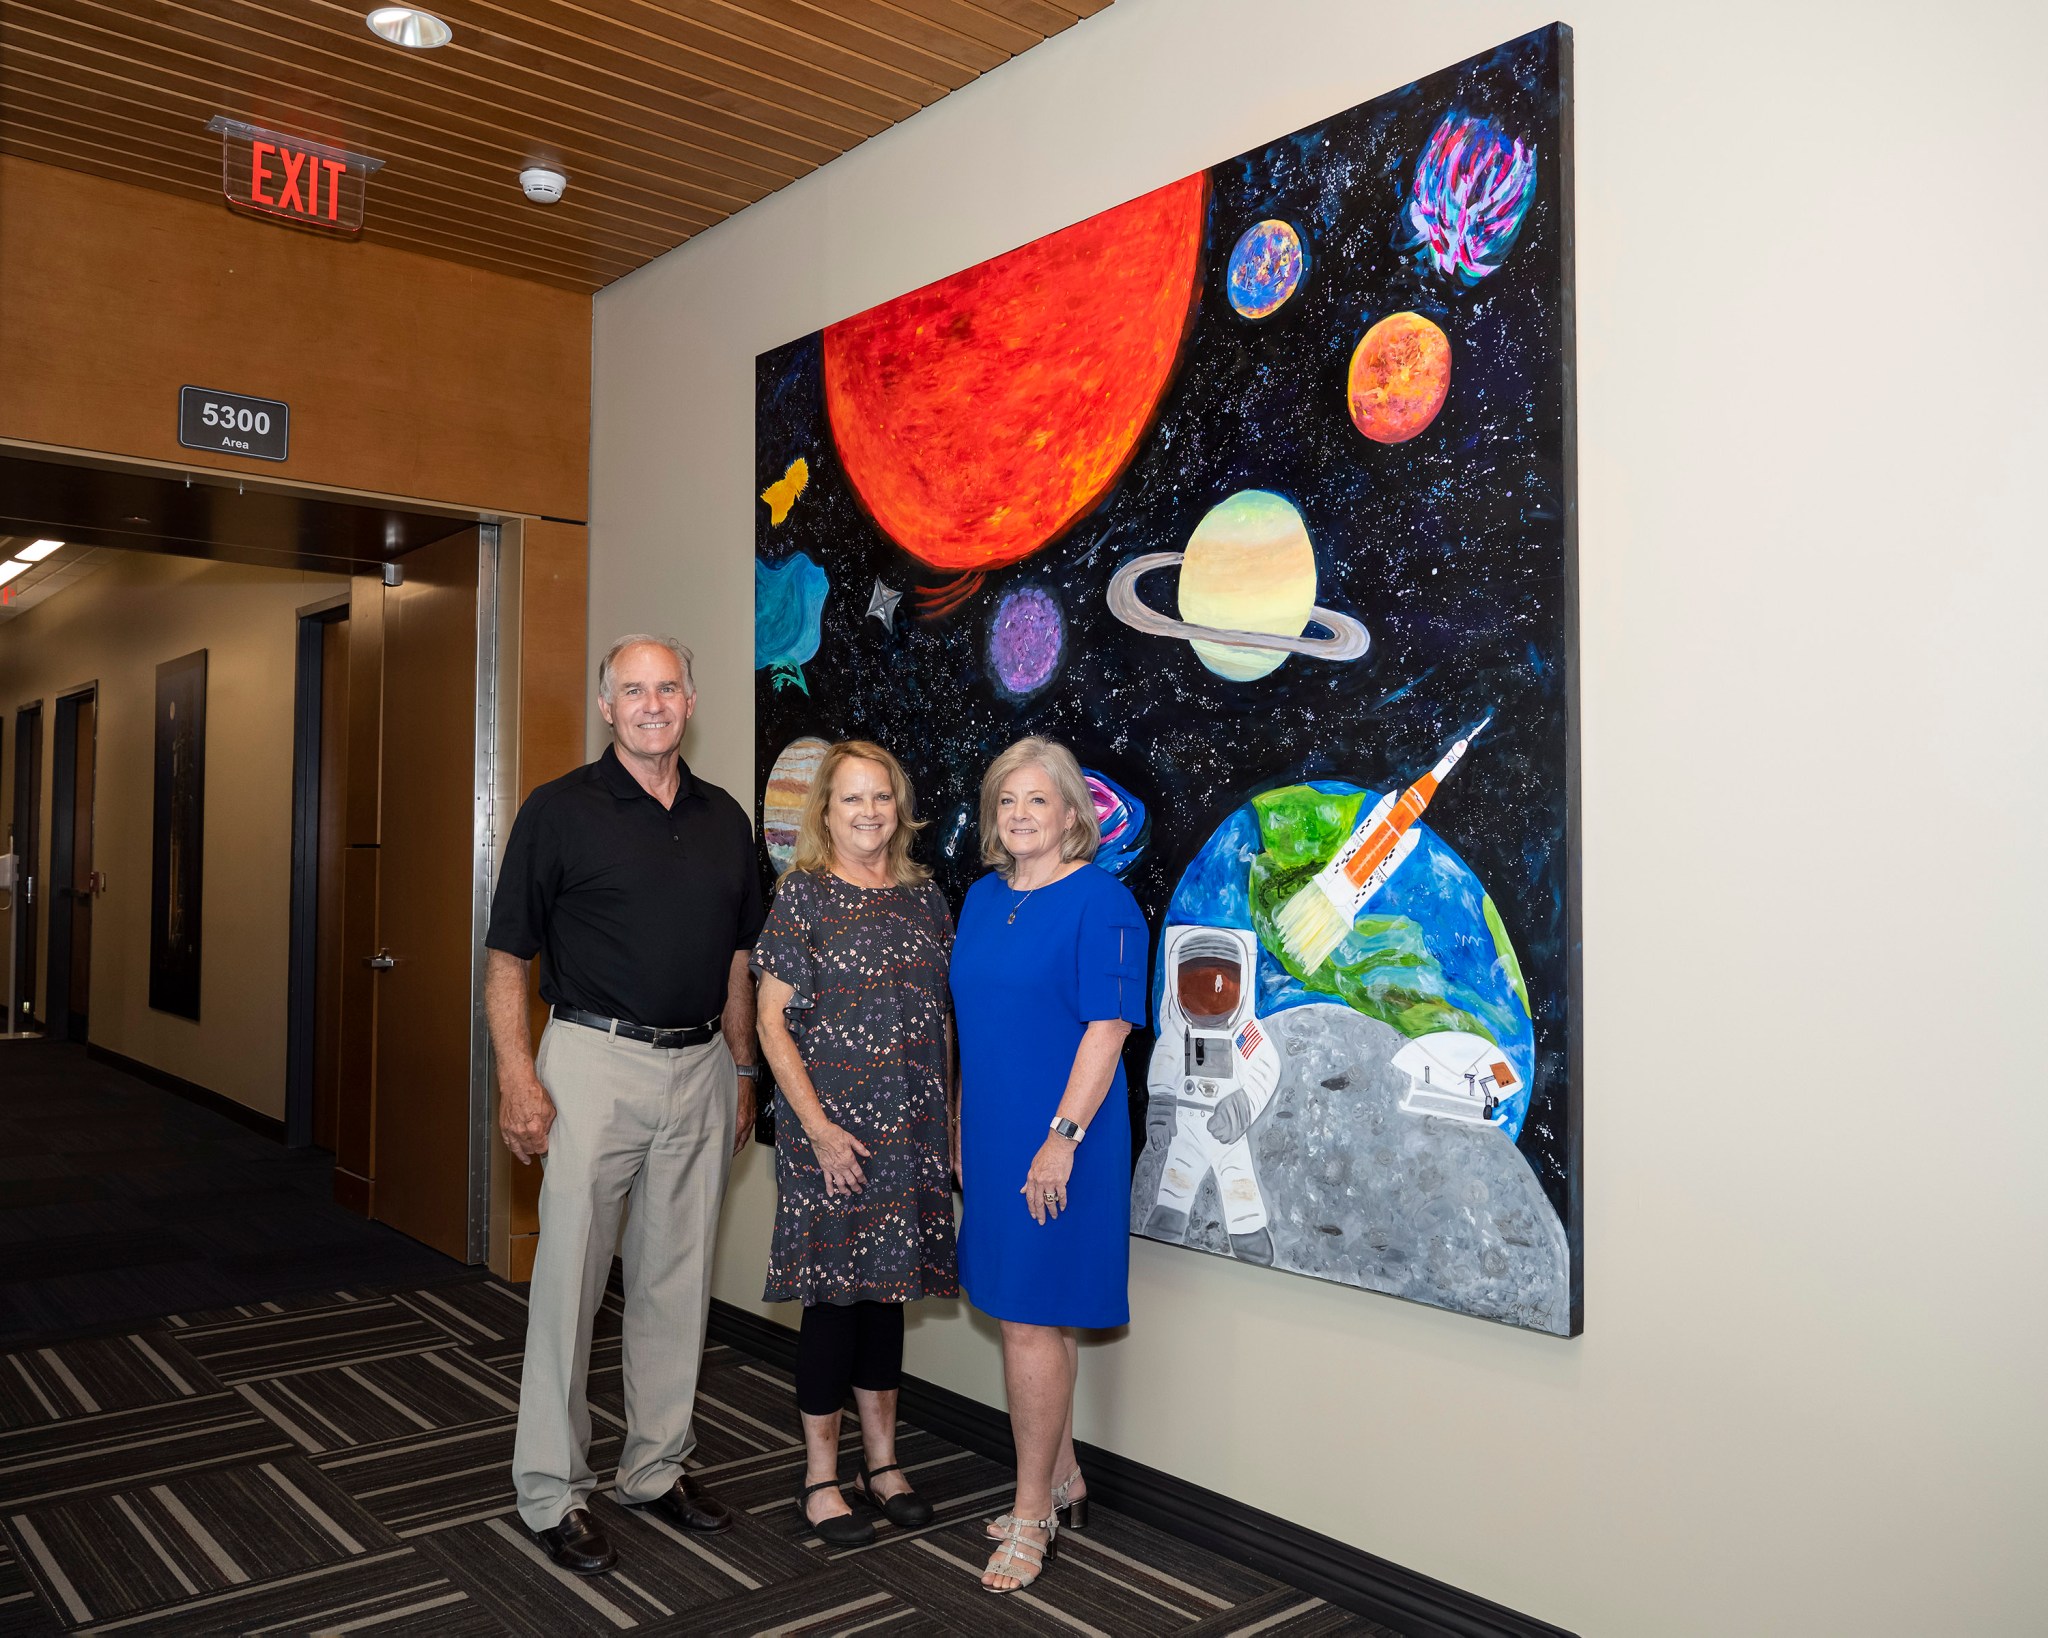 Steve and Pam Cash stand with Marshall Director Jody Singer, right, in front of the canvas they helped senior leaders create.